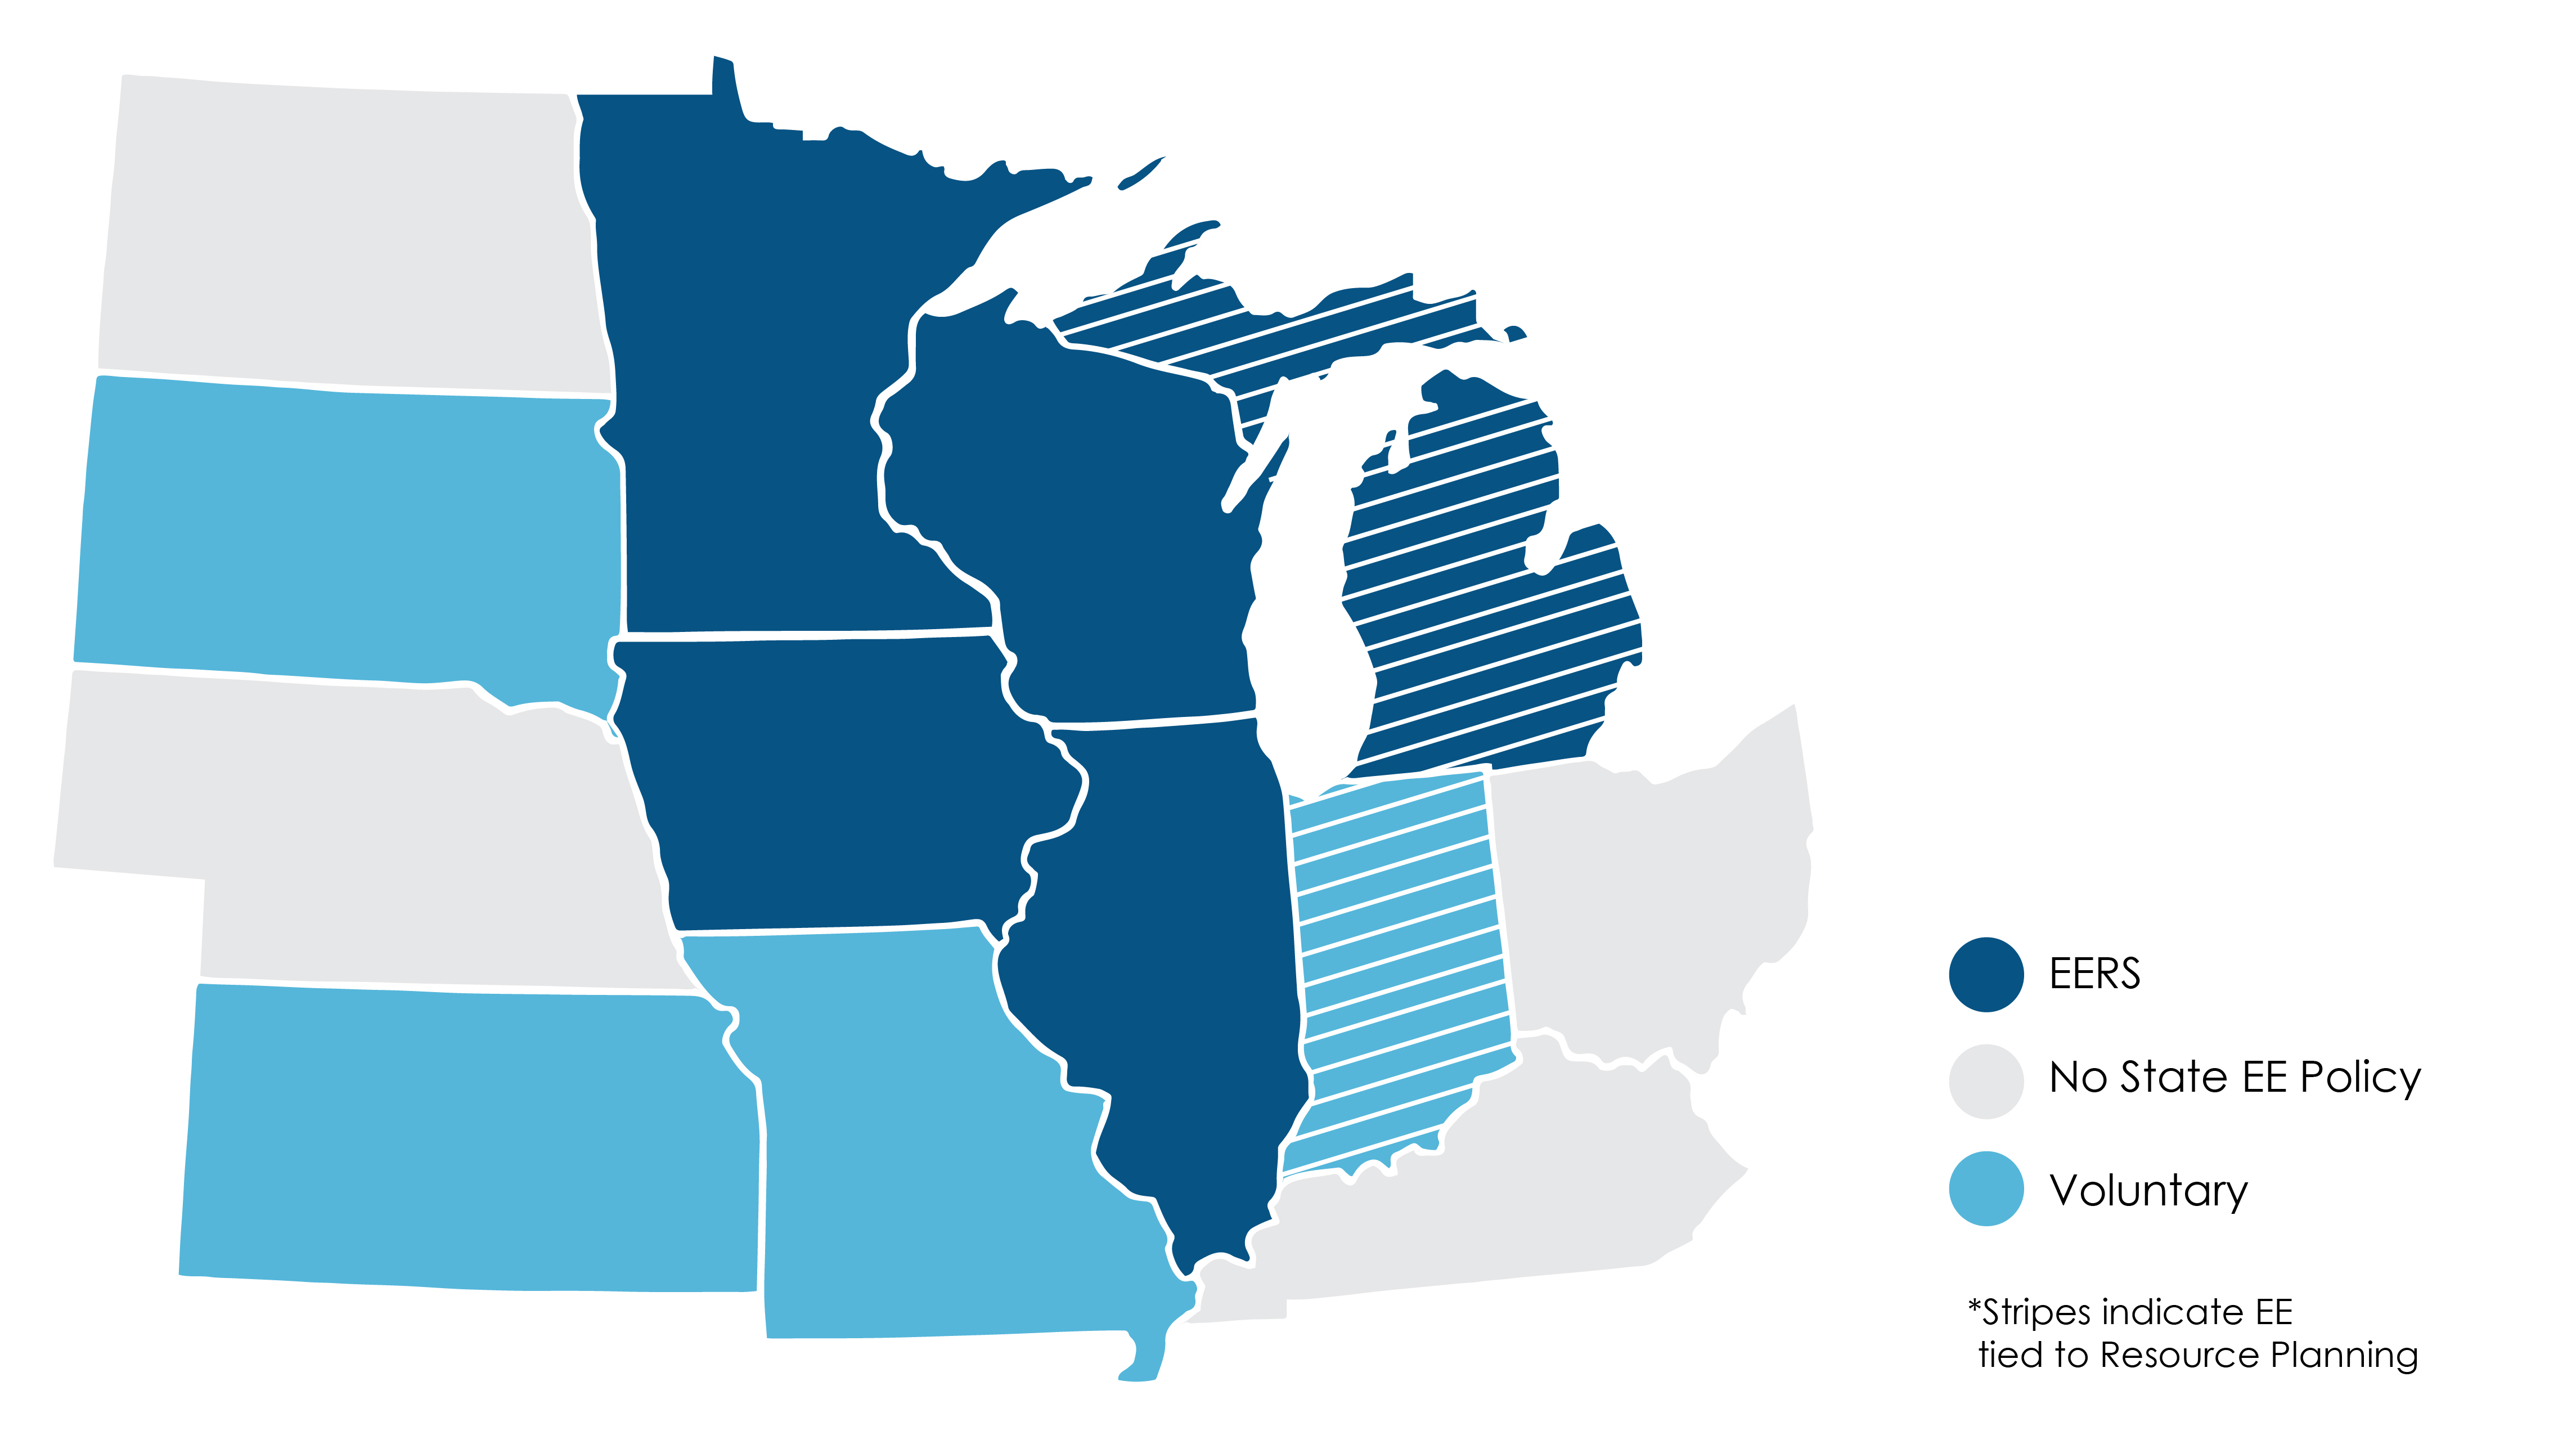 EERS: IA, IL, MI, MN, WI   Voluntary: IN, KS, MO, SD  EE Tied to Resource Planning: IN, MI (striped or half & half with EERS/Voluntary)   No State EE Policy: NE, ND, OH